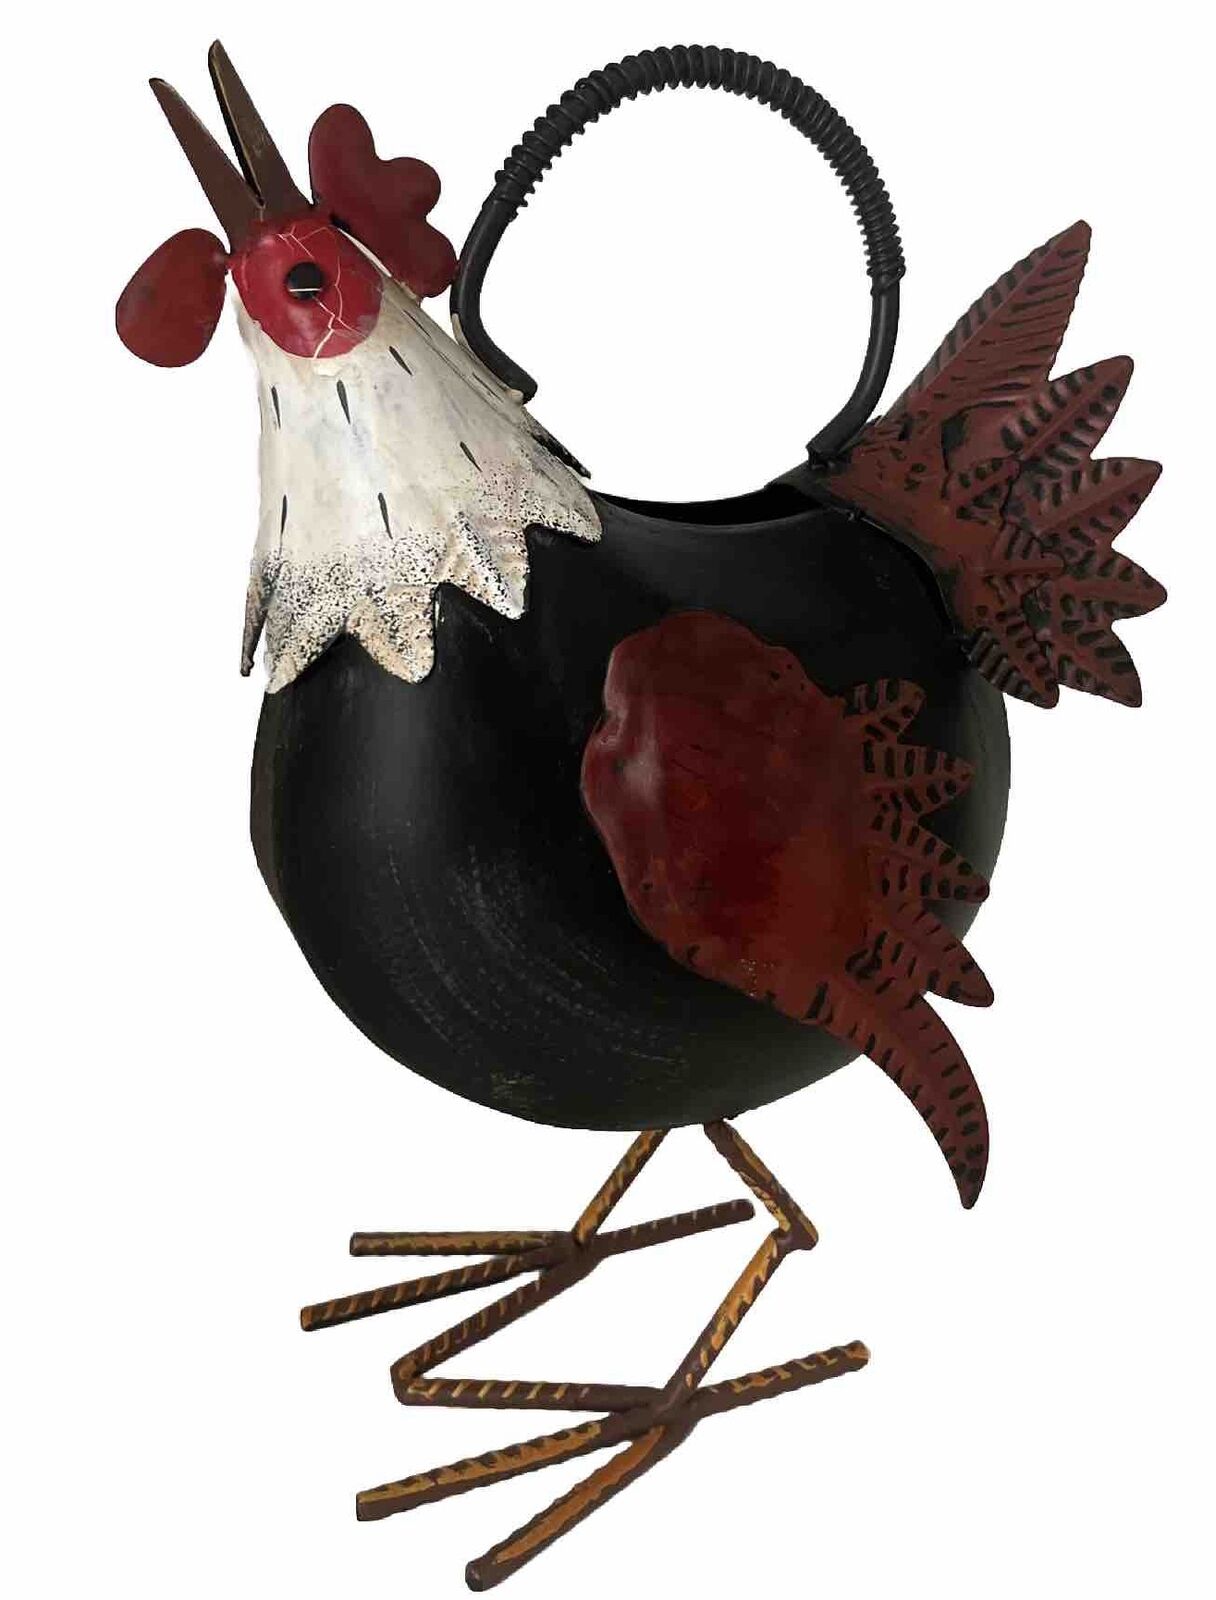 Rooster Figurine Chicken Country Home Decor Metal Sculpture Handcrafted Art